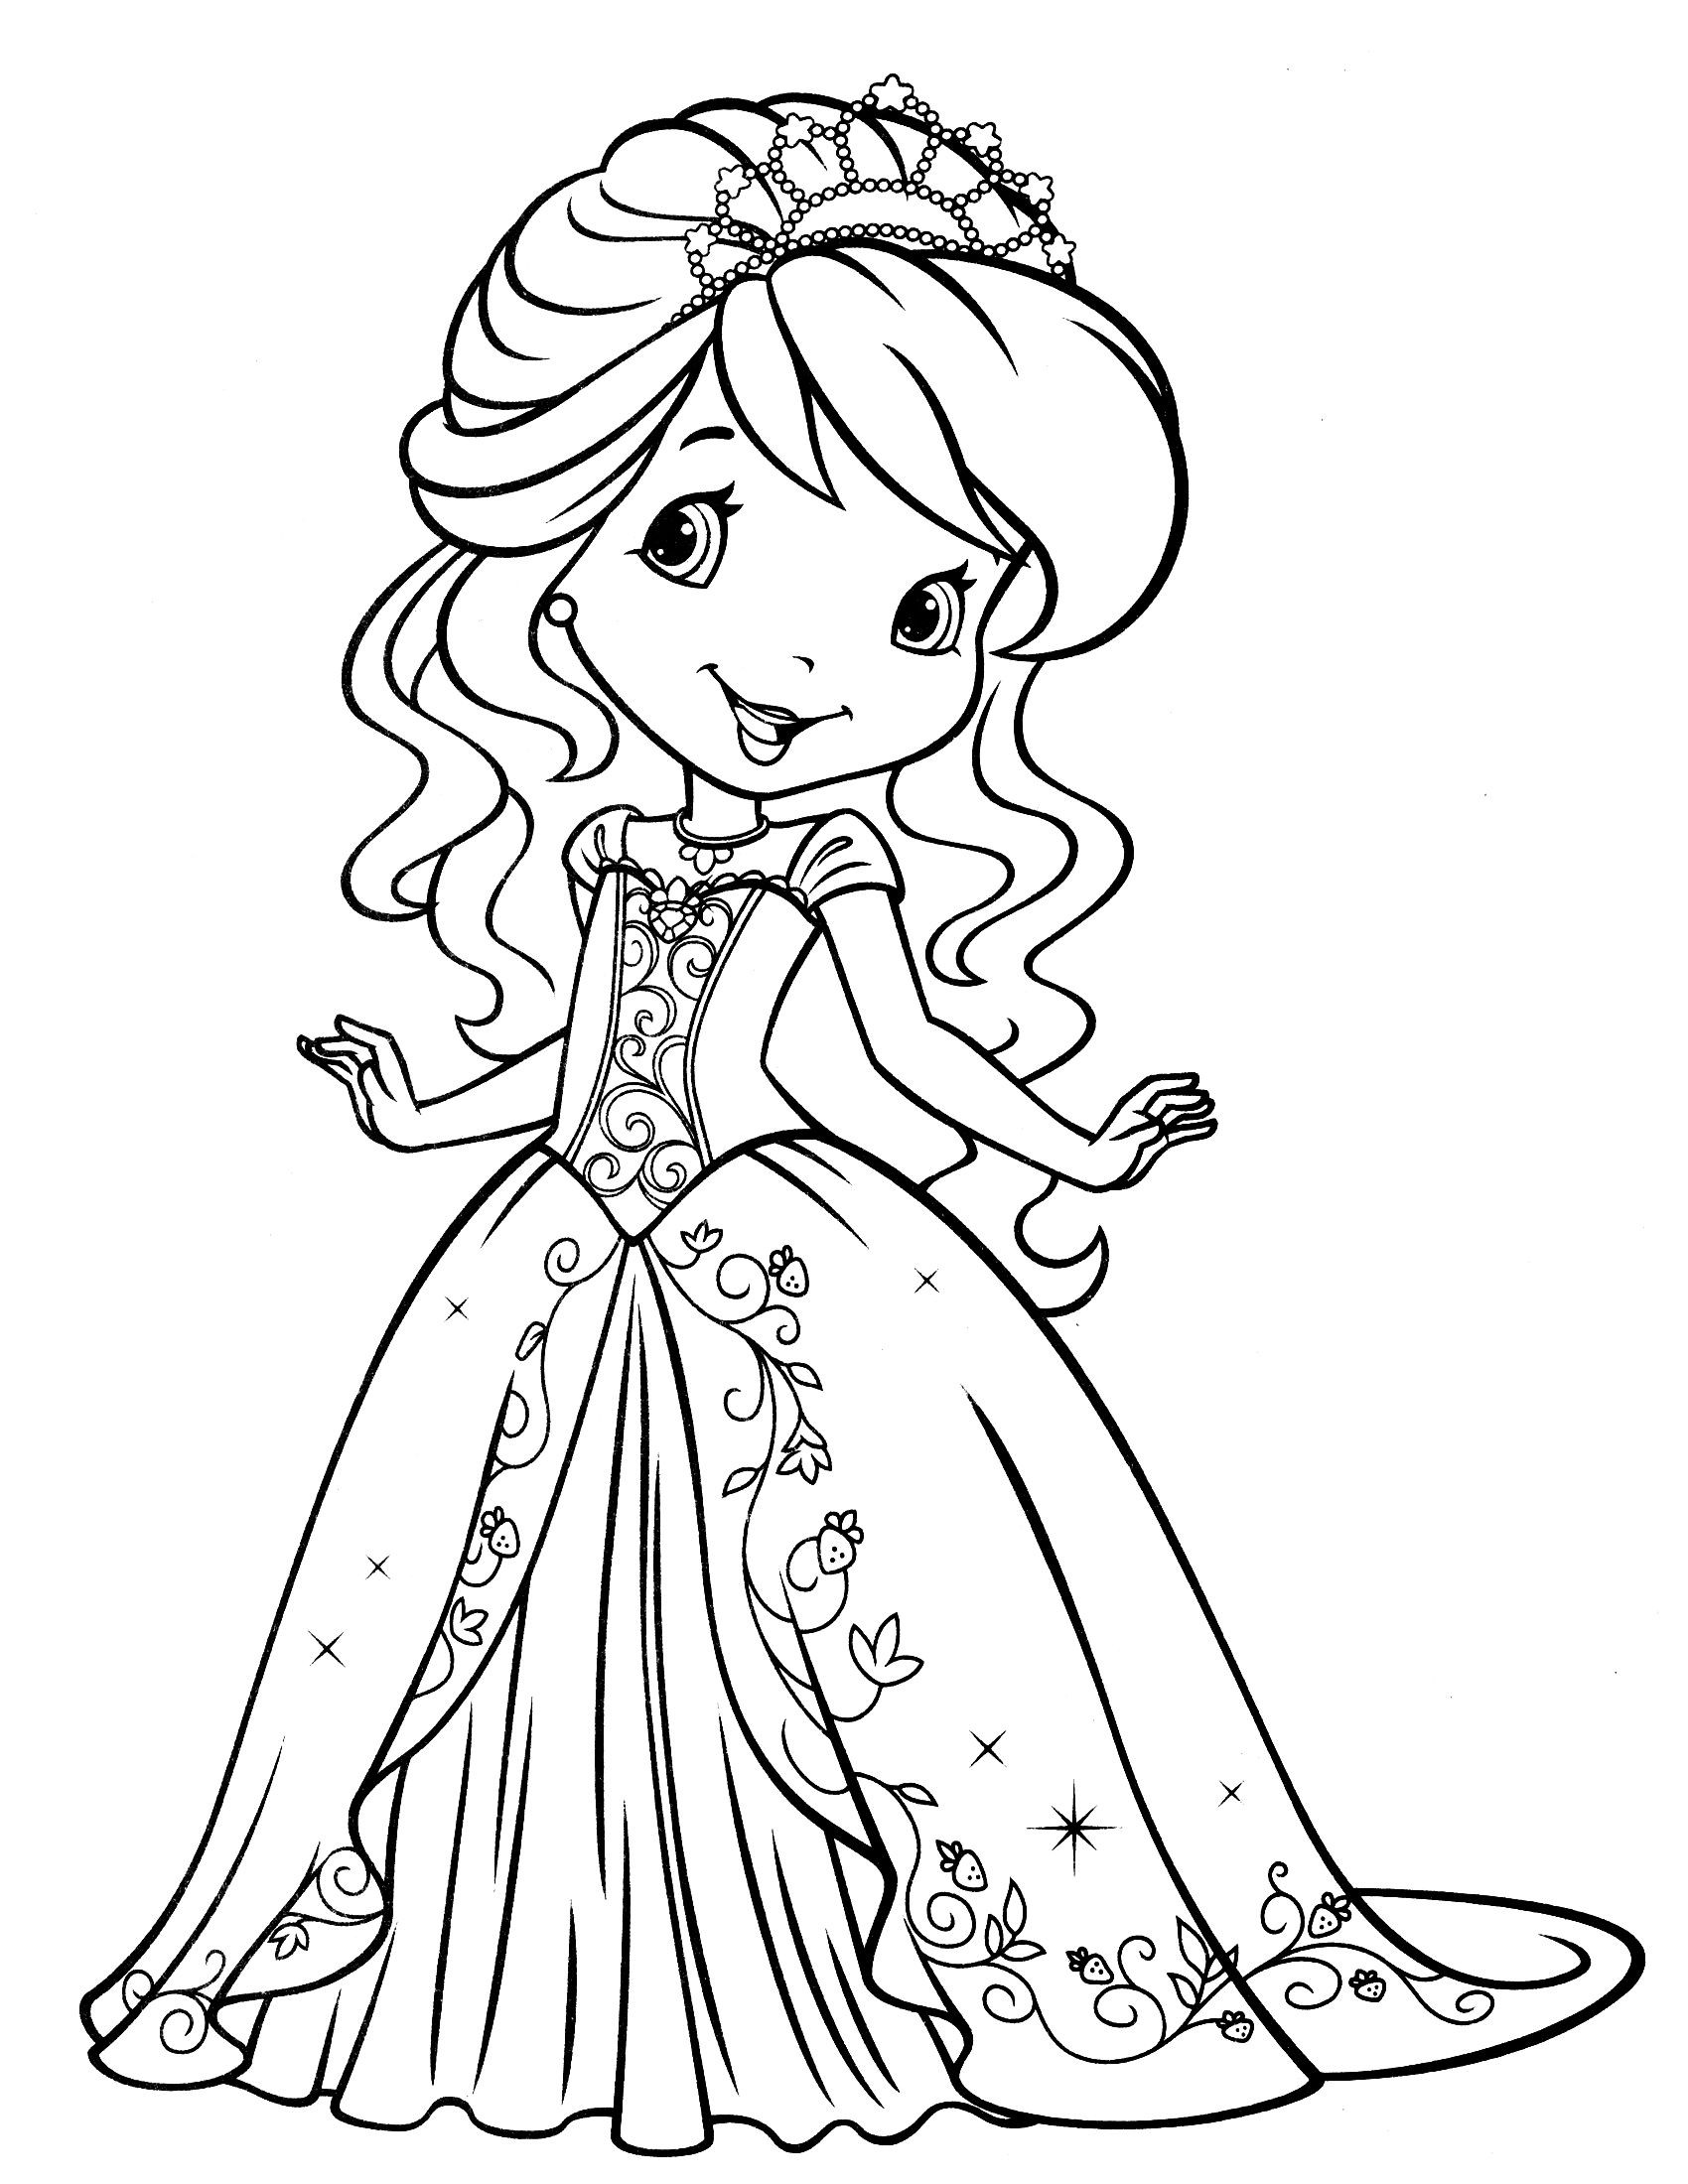 Princess Coloring Pages For Girls
 strawberry shortcake printables